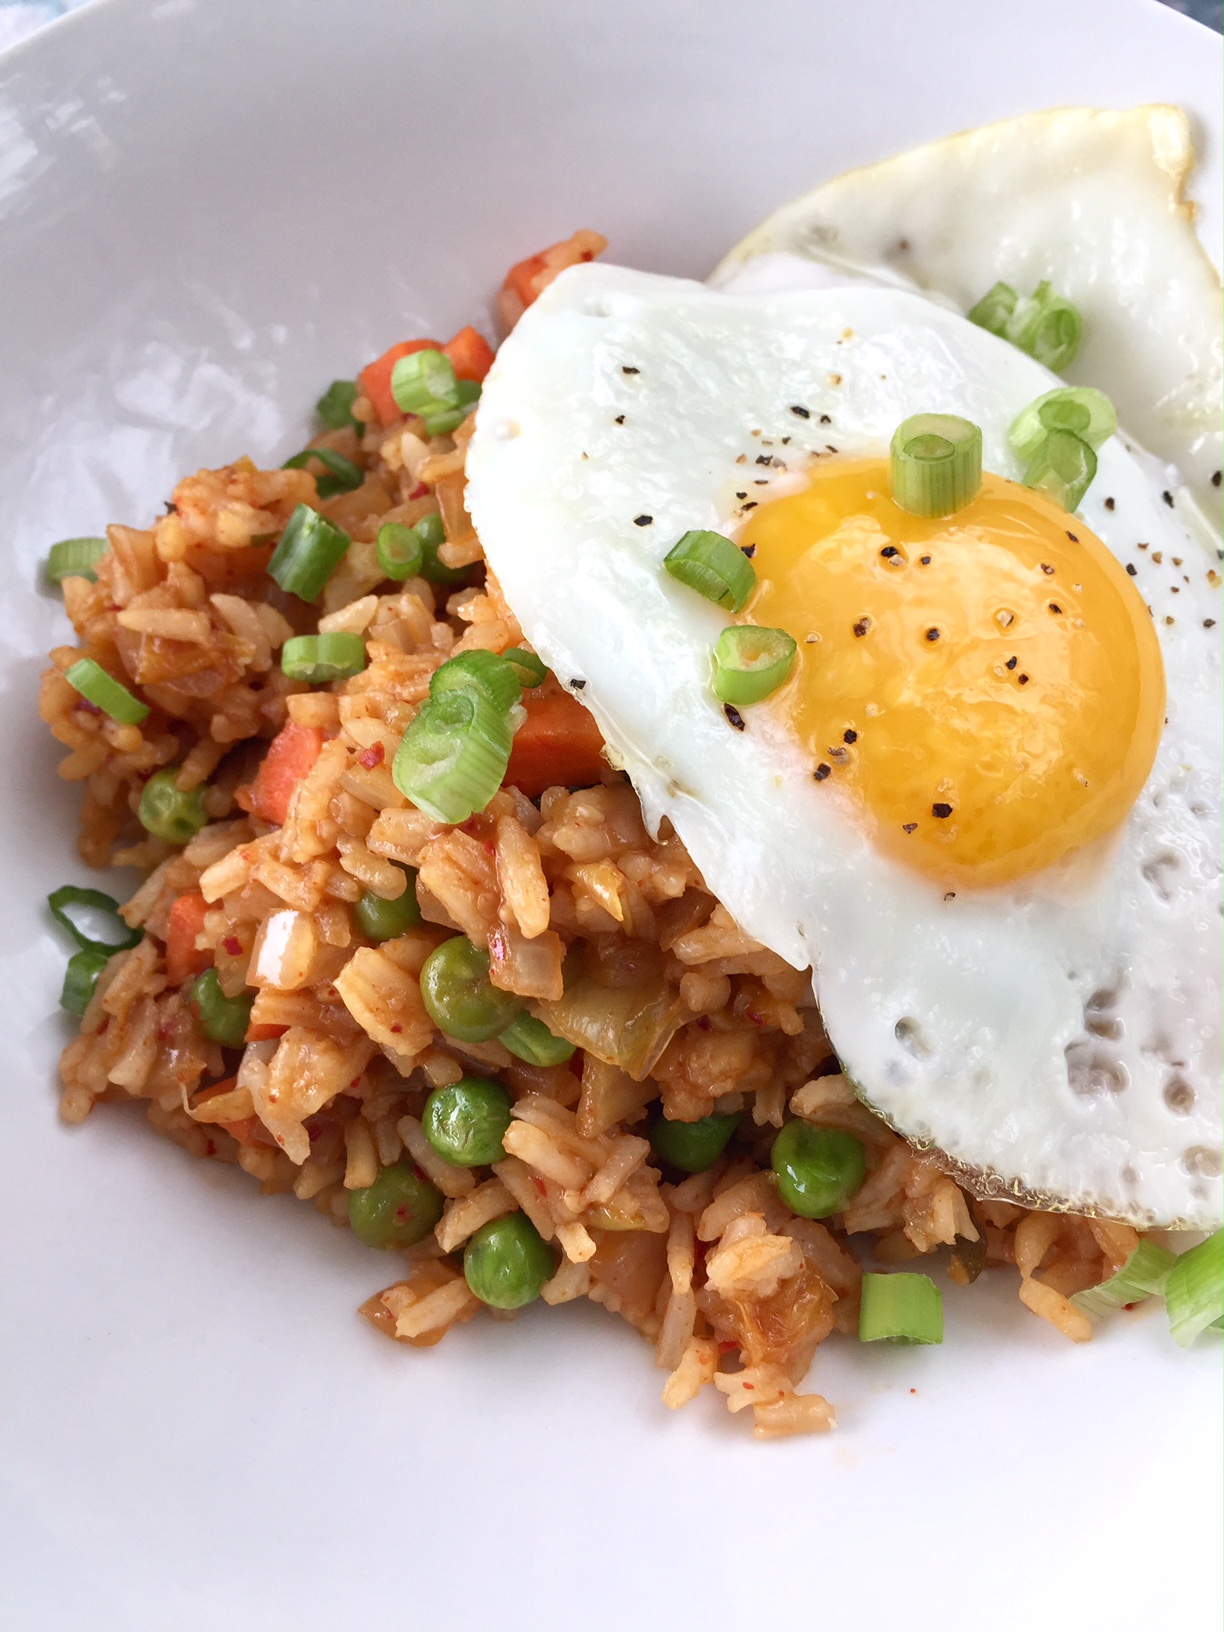 Shop Ethnic Markets to Save Money Try Flavors of the World | Kimchi Fried Rice